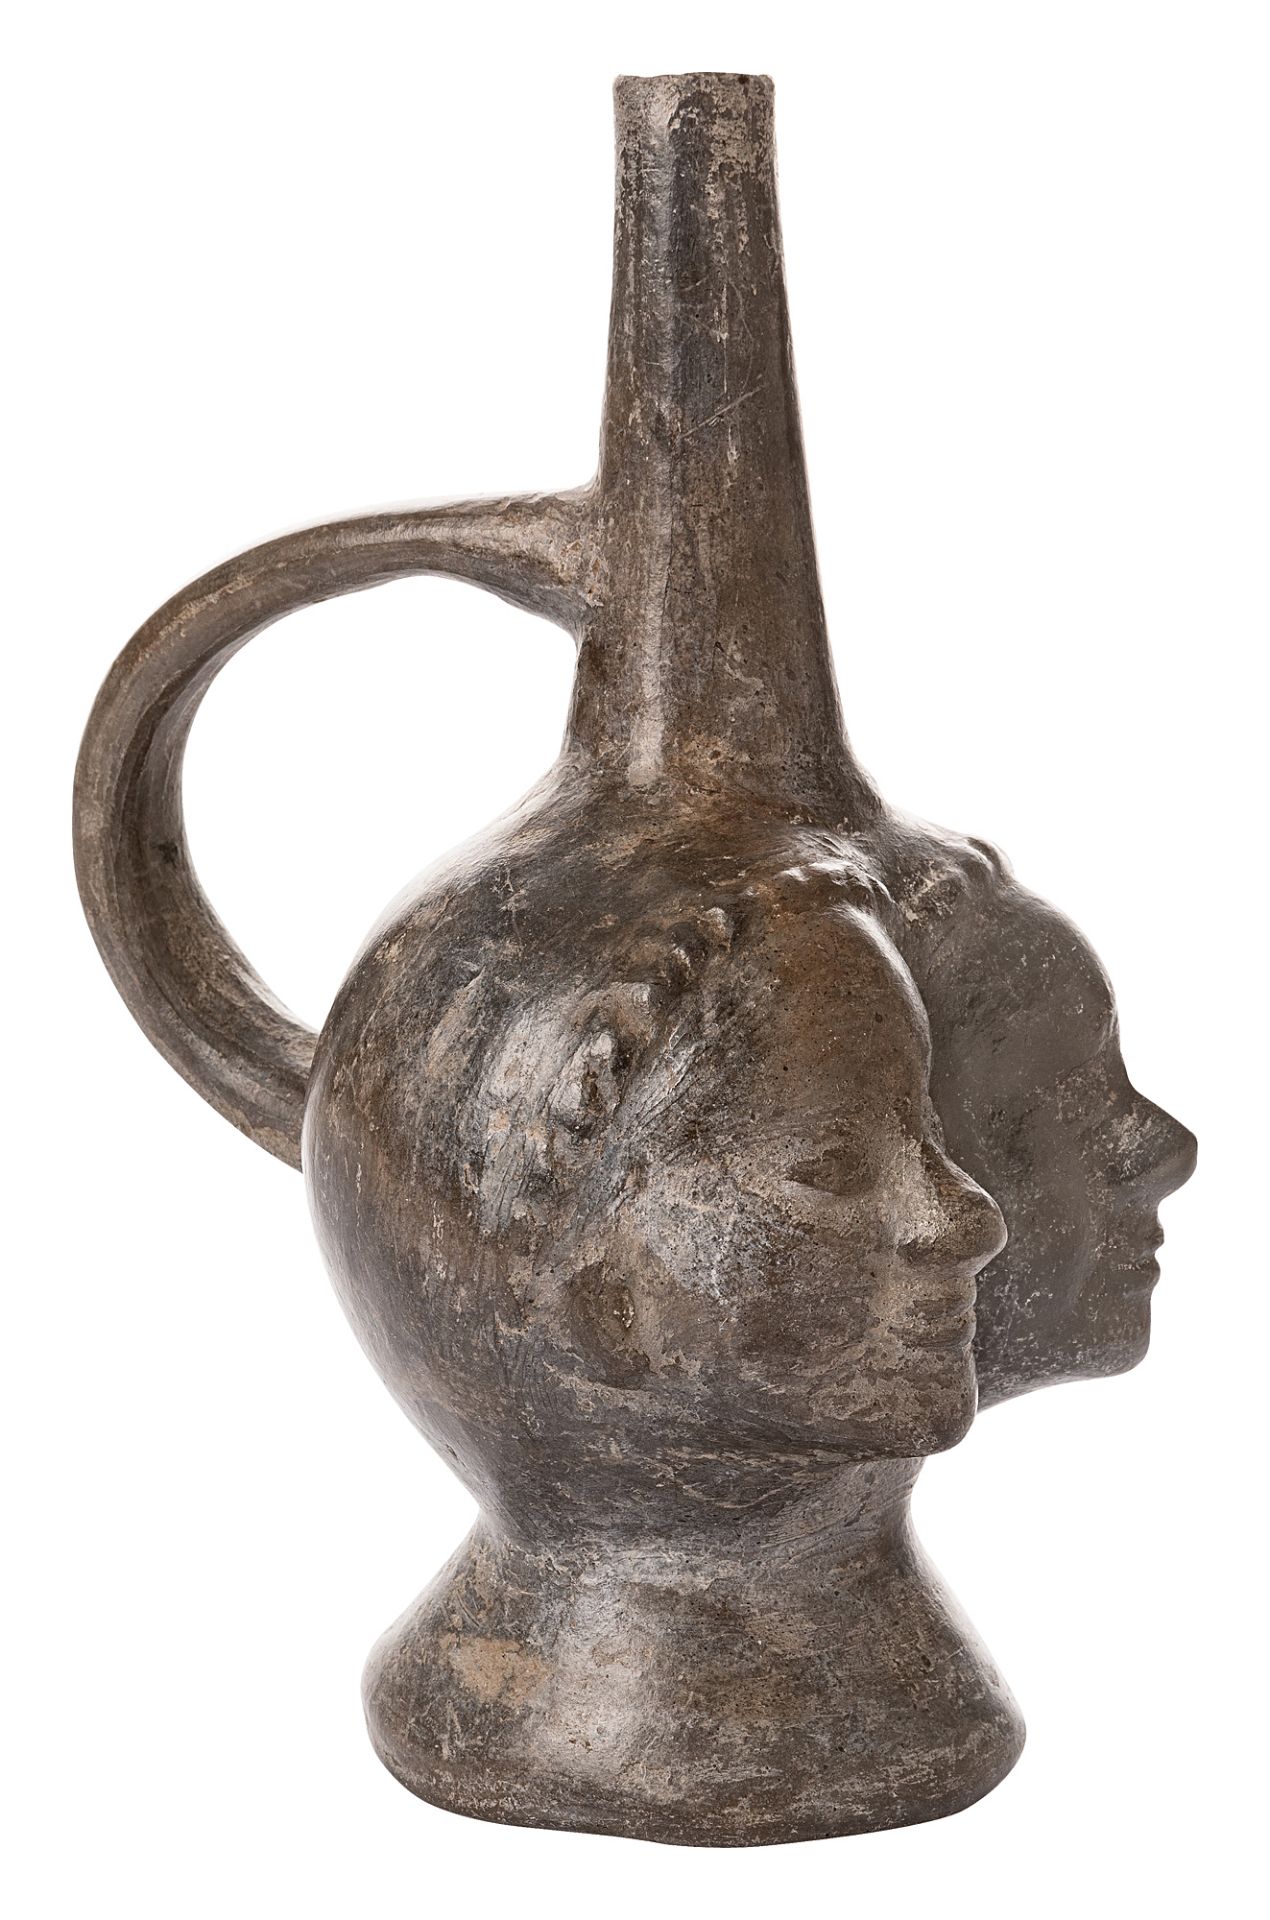 Two-faced jug